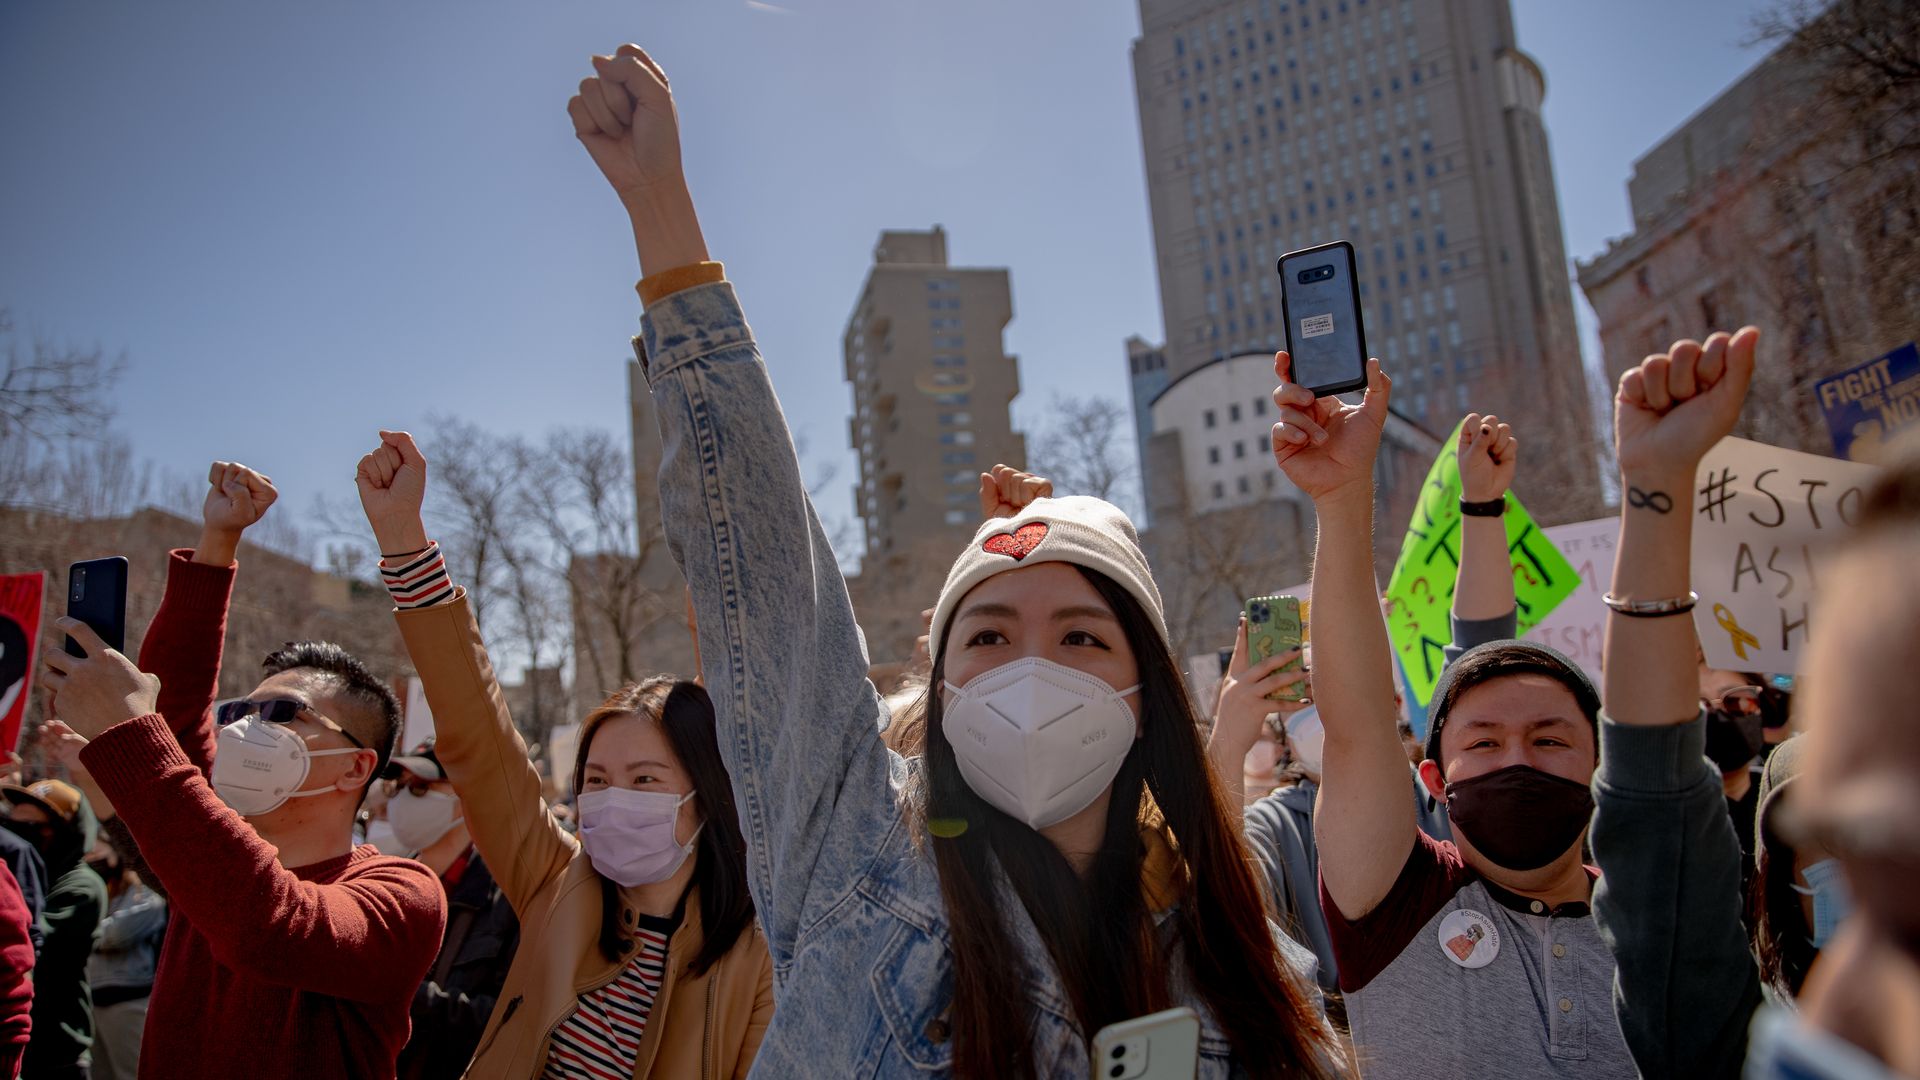 Demonstrators raise their fists during an AAPI Rally Against Hate in New York, U.S., on Sunday, March 21, 2021